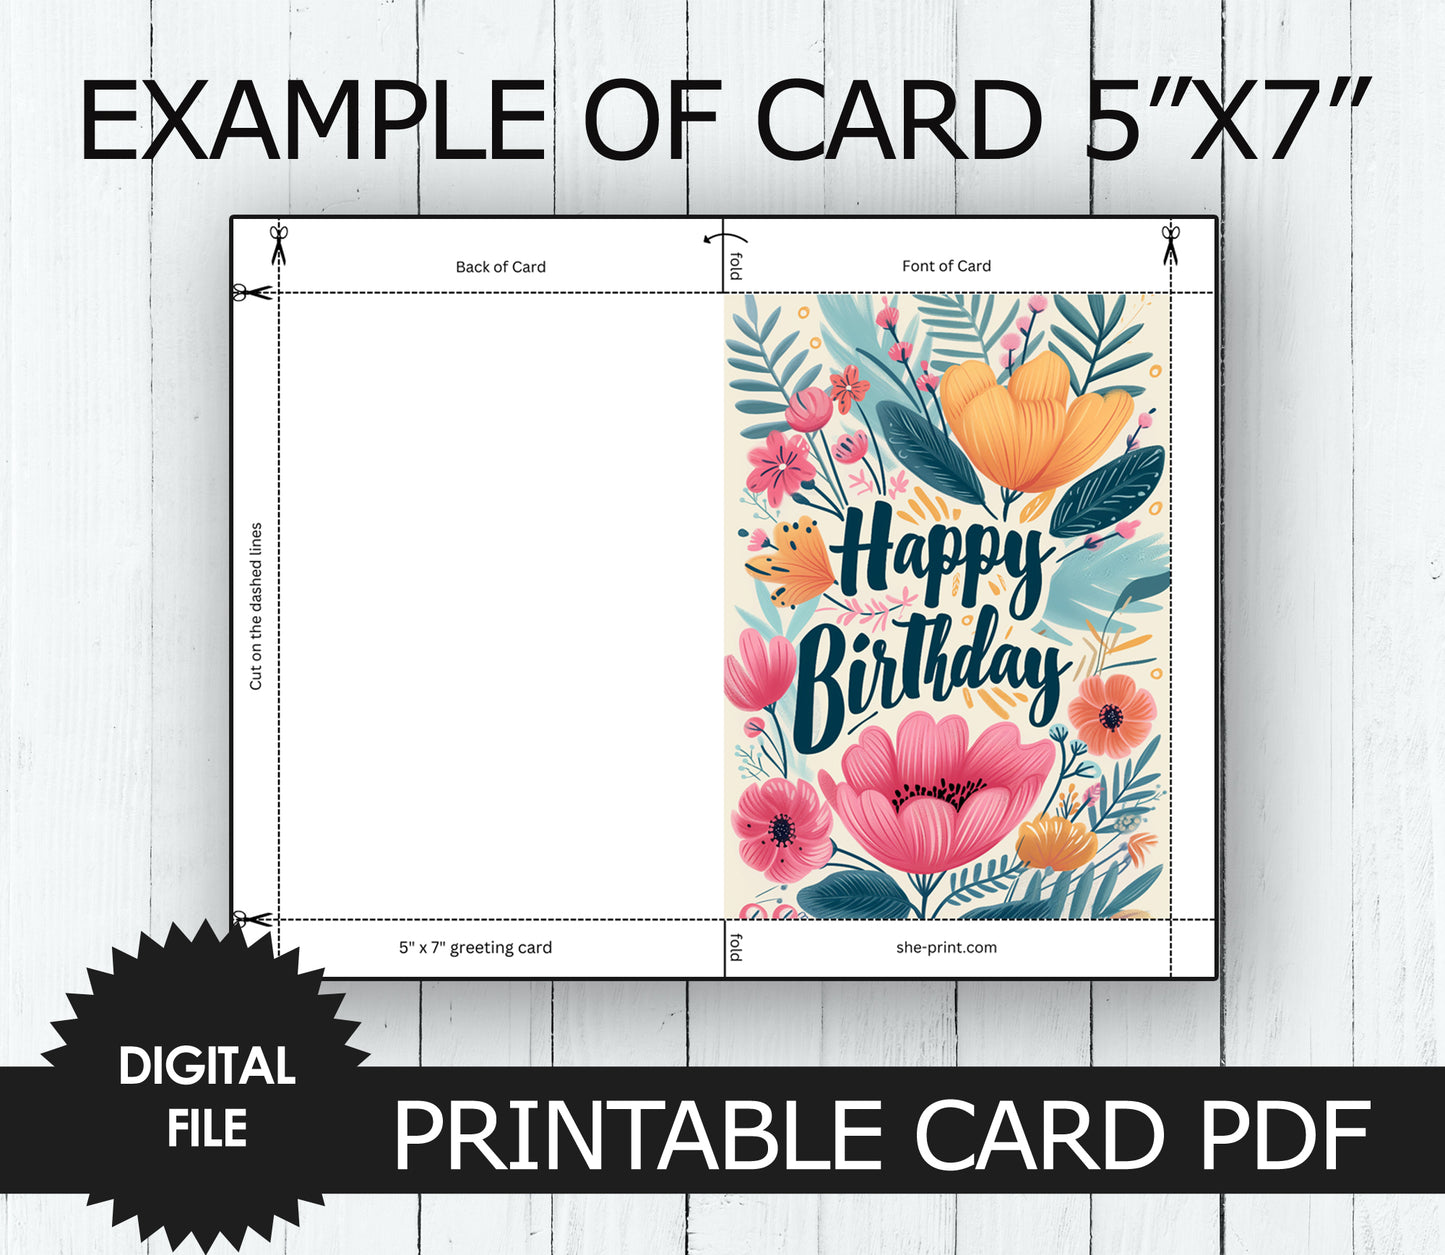 Example of printable card 5x7, print at home